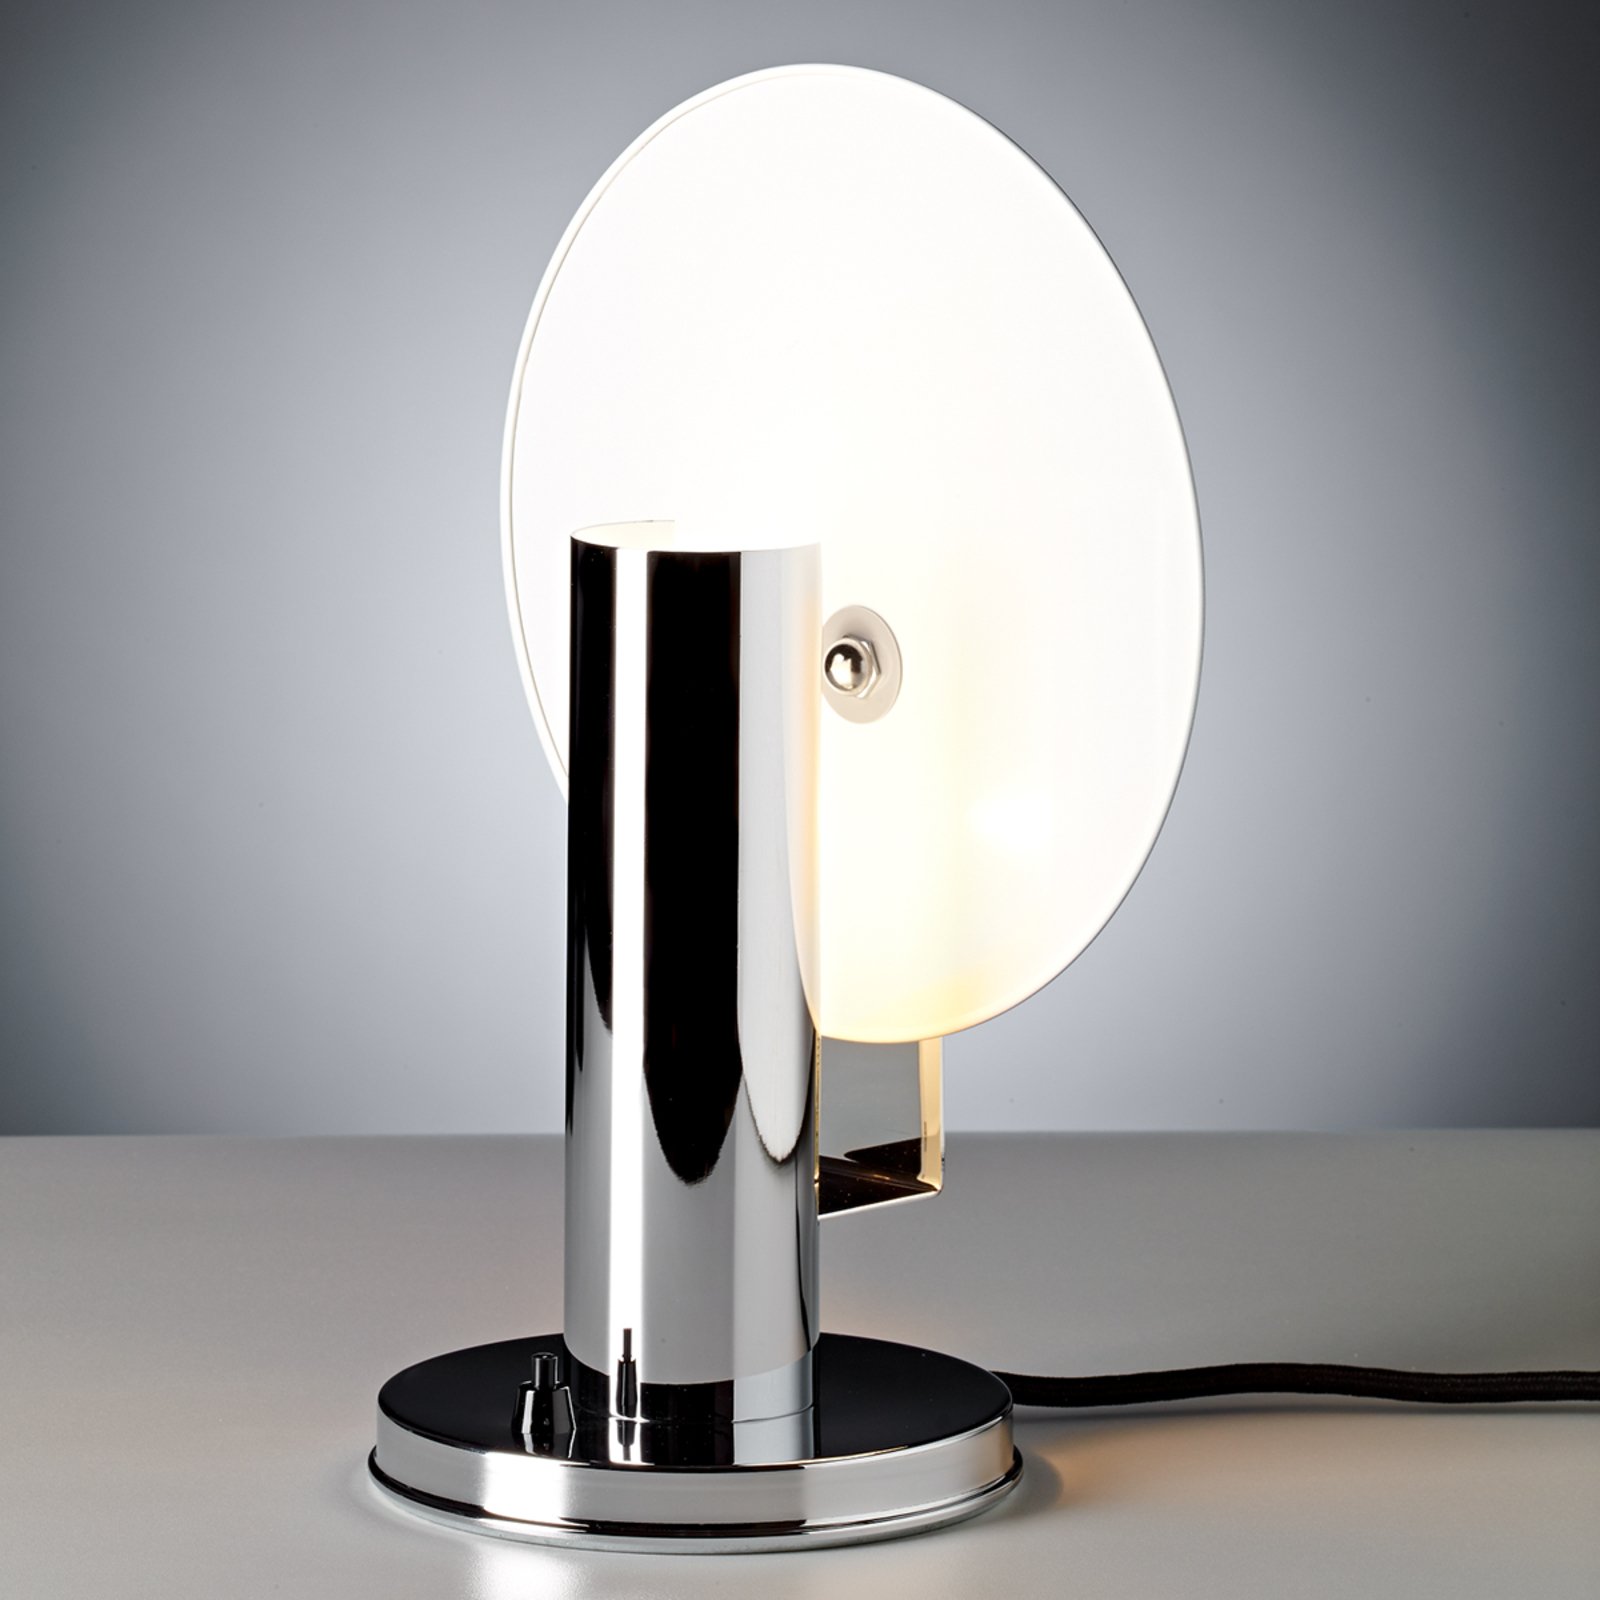 De Stijl table lamp with a chrome-plated frame